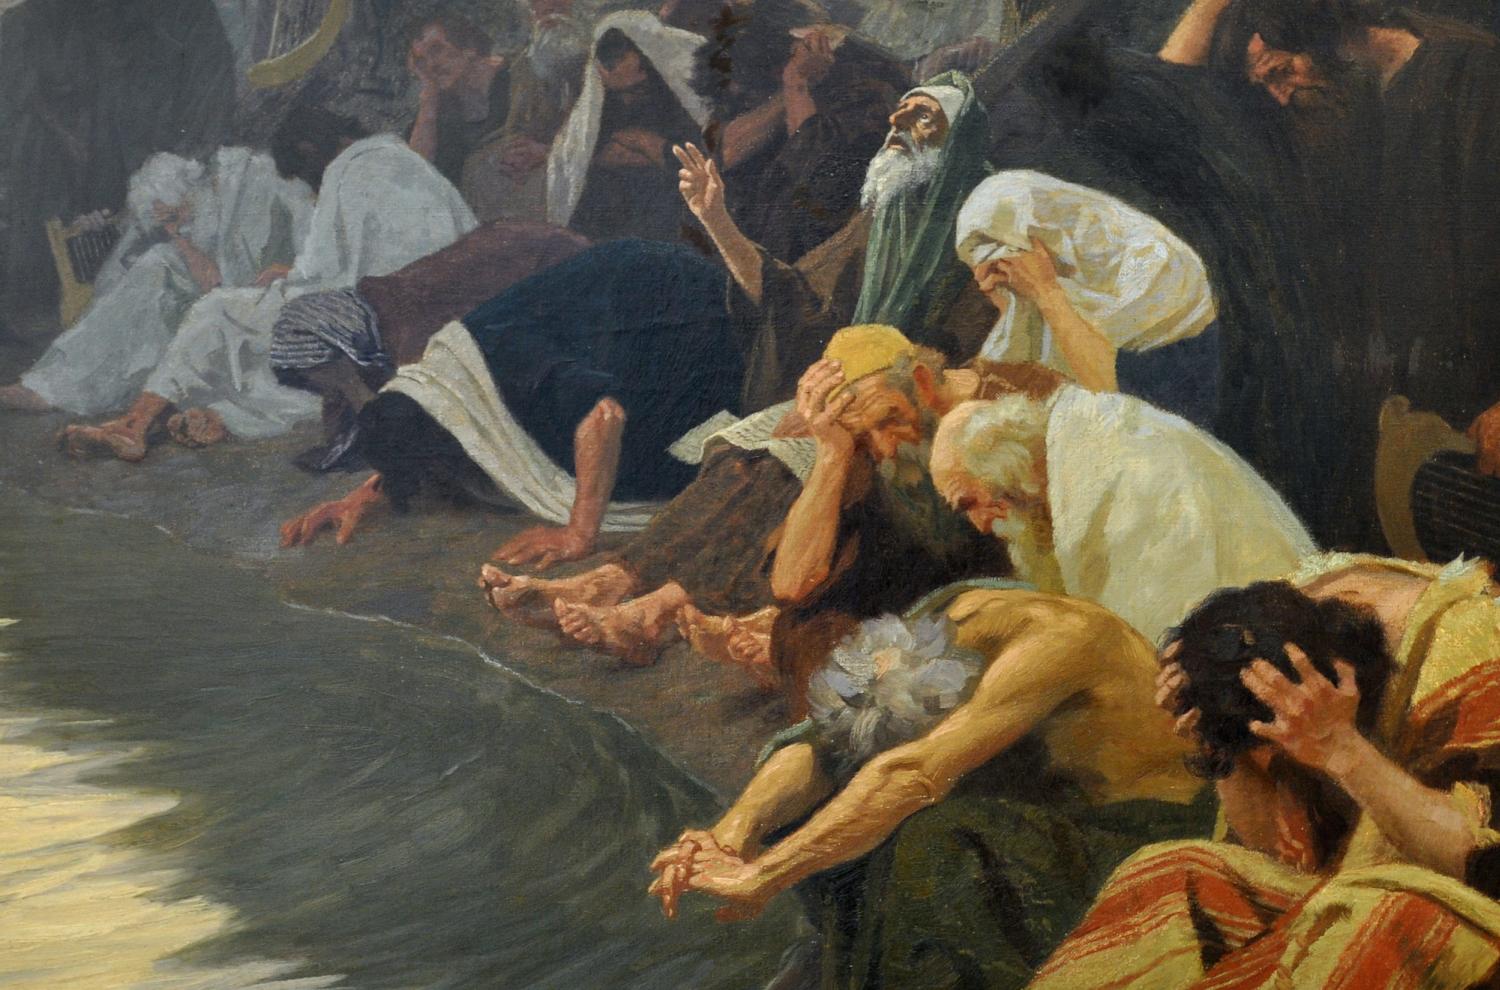 “At the Waters of Babylon” by Gebhard Fugel. Public Domain Image.